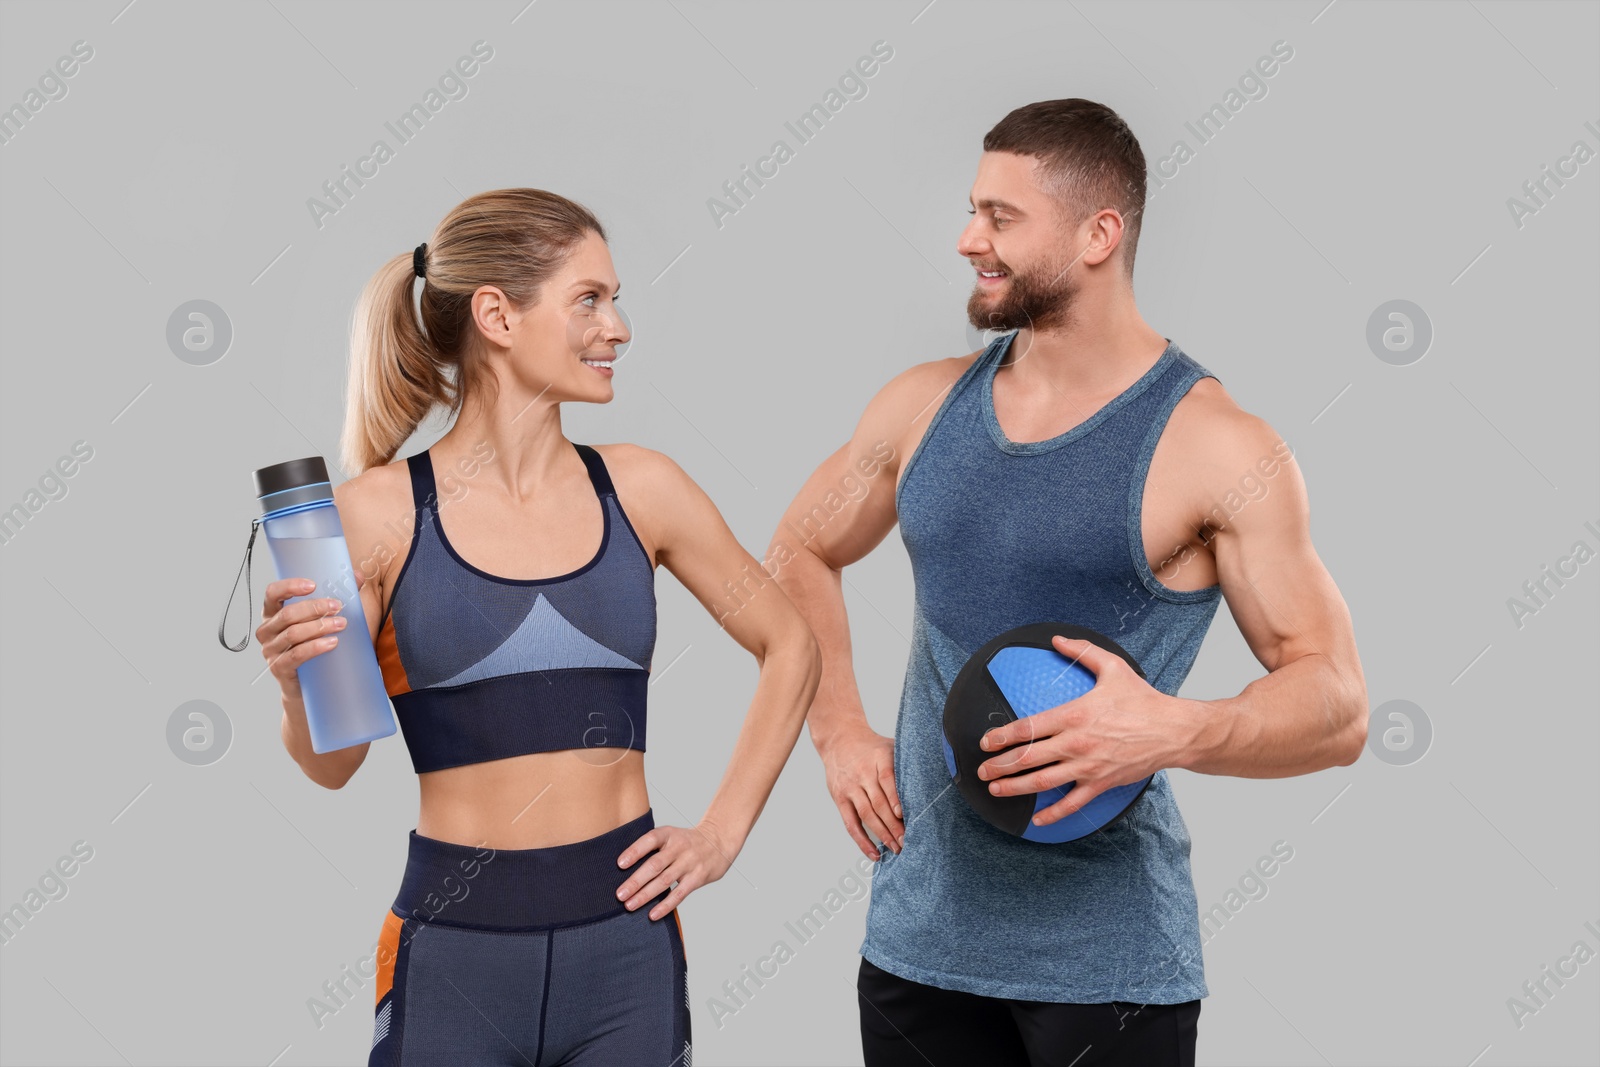 Photo of Athletic people with bottle of water and medicine ball on grey background